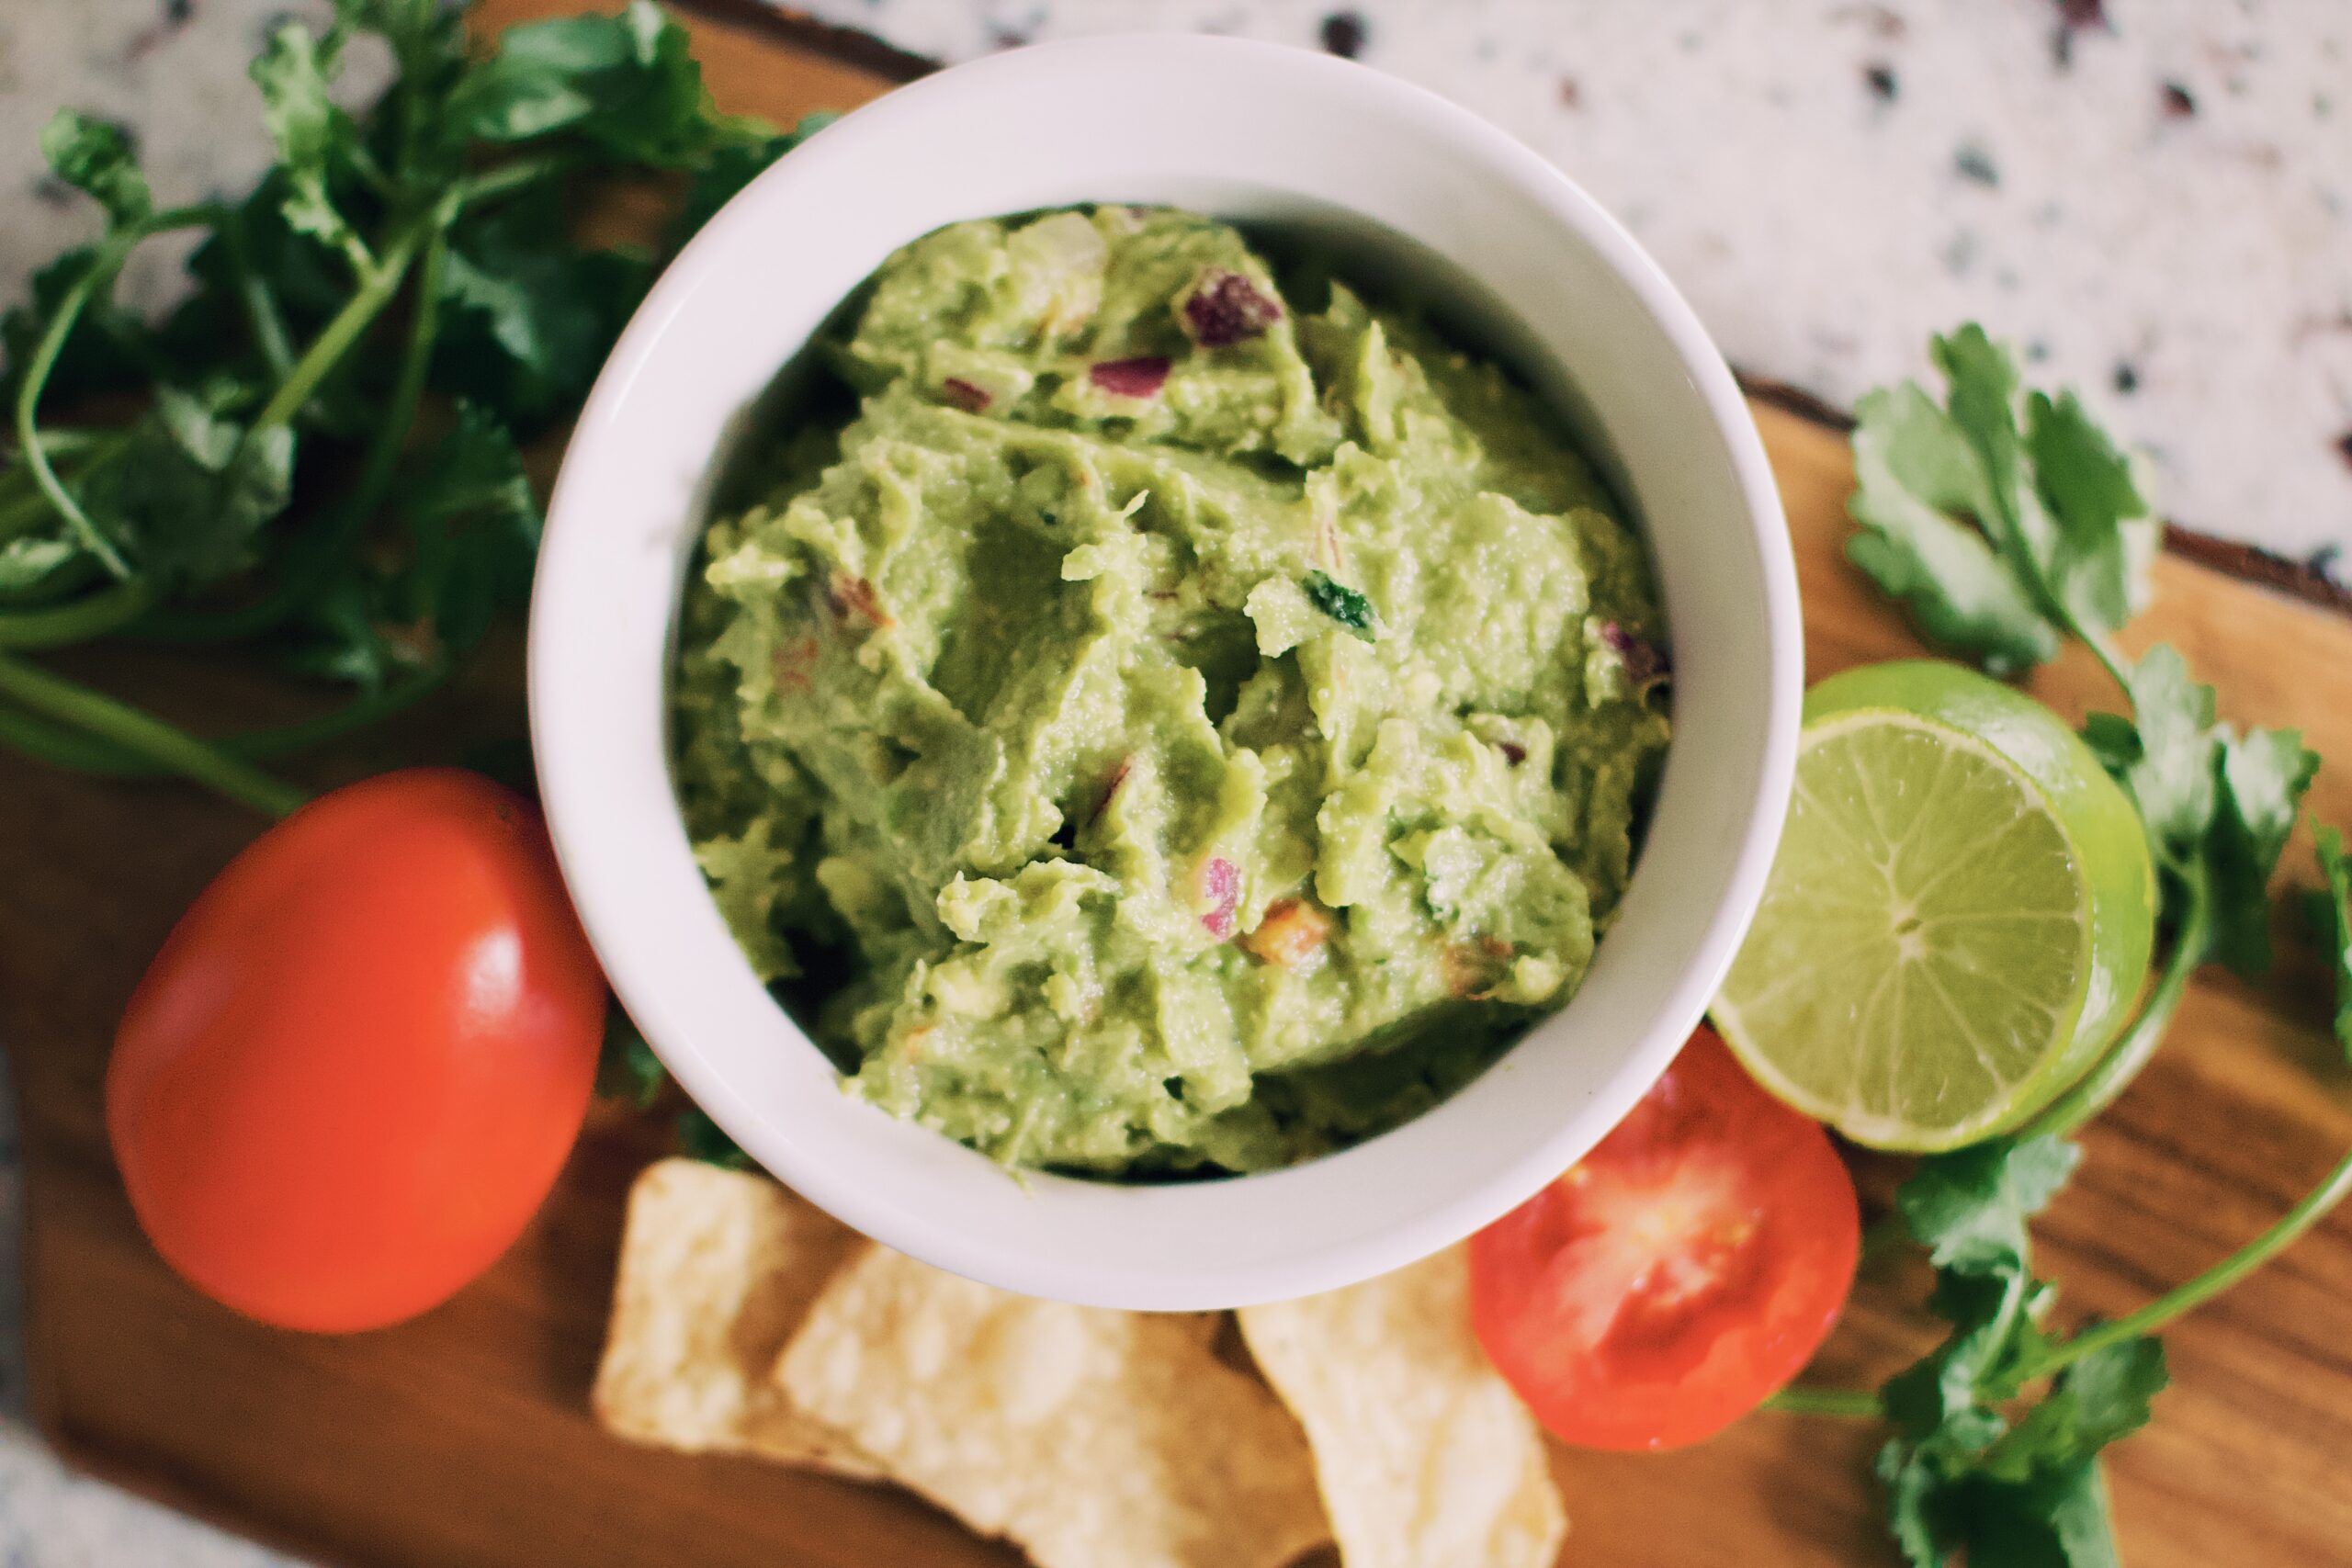 Guacamole with veggies in background